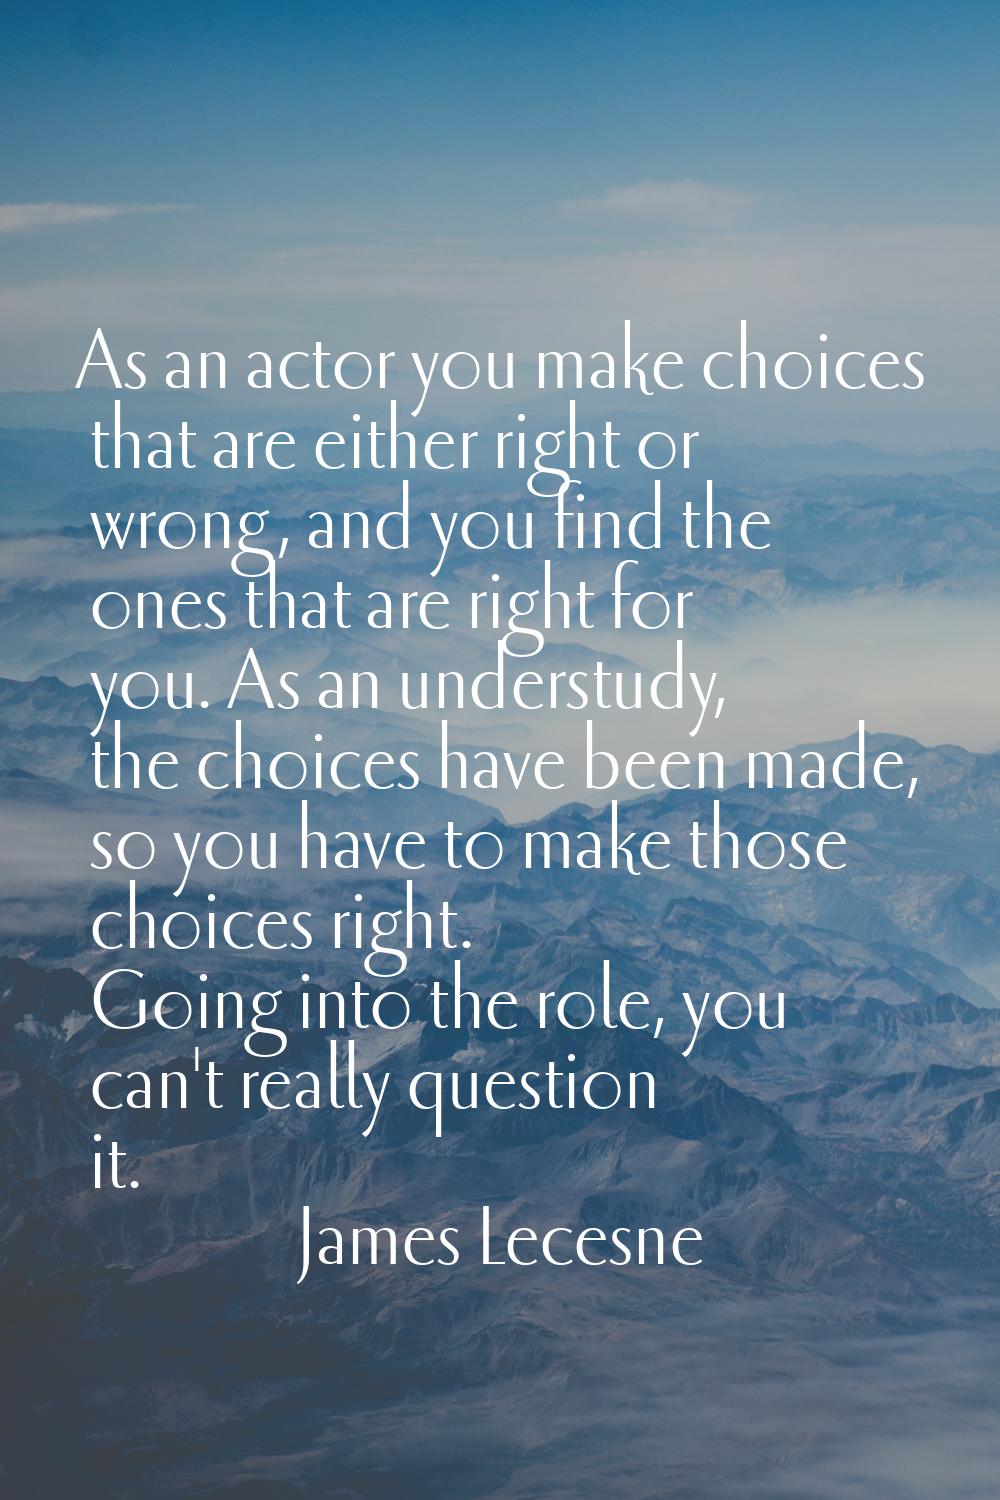 As an actor you make choices that are either right or wrong, and you find the ones that are right f